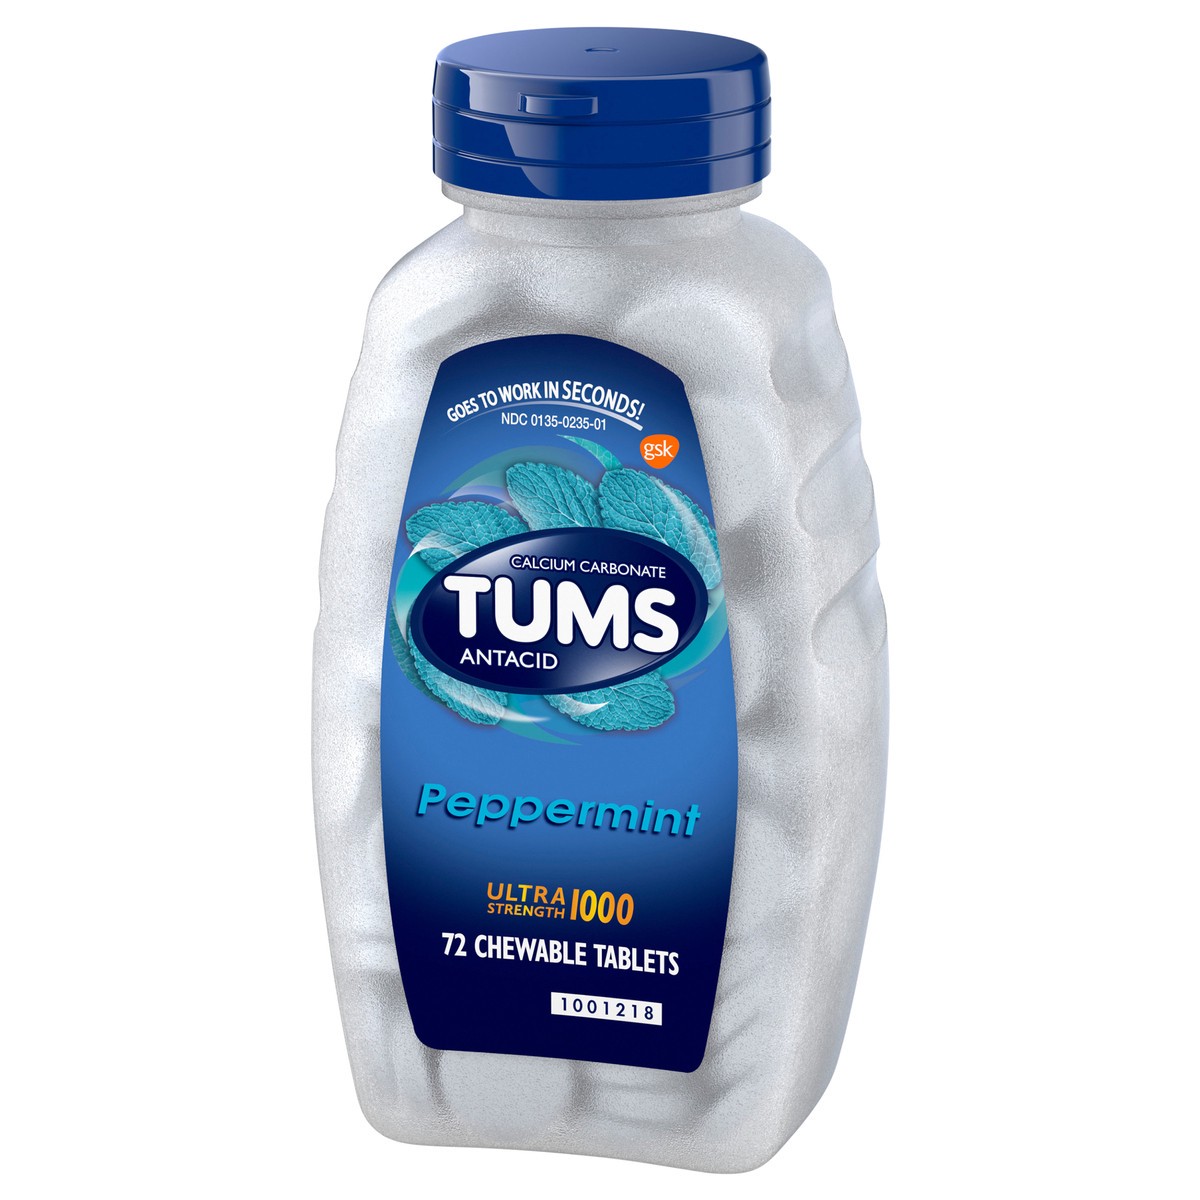 slide 3 of 9, TUMS Chewable Antacid Tablets for Ultra Strength Heartburn Relief, Peppermint - 72 Count, 72 ct